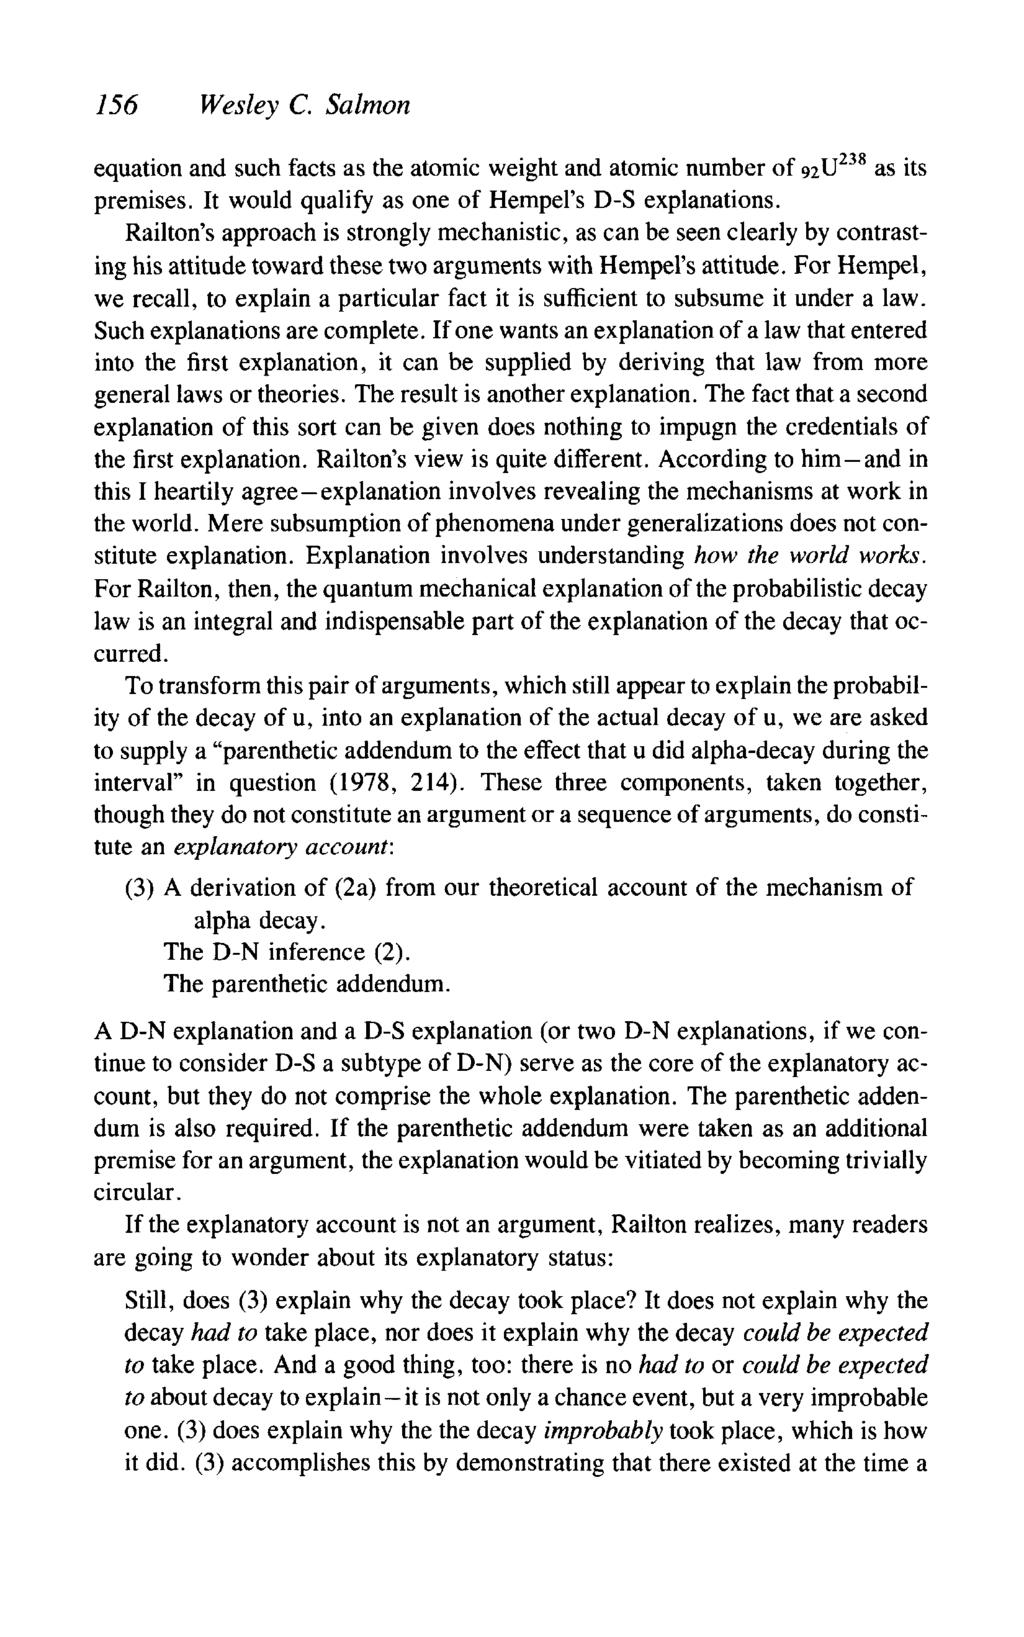 156 Wesley C. Salmon equation and such facts as the atomic weight and atomic number of 92U 238 as its premises. It would qualify as one of Hempel's D-S explanations.